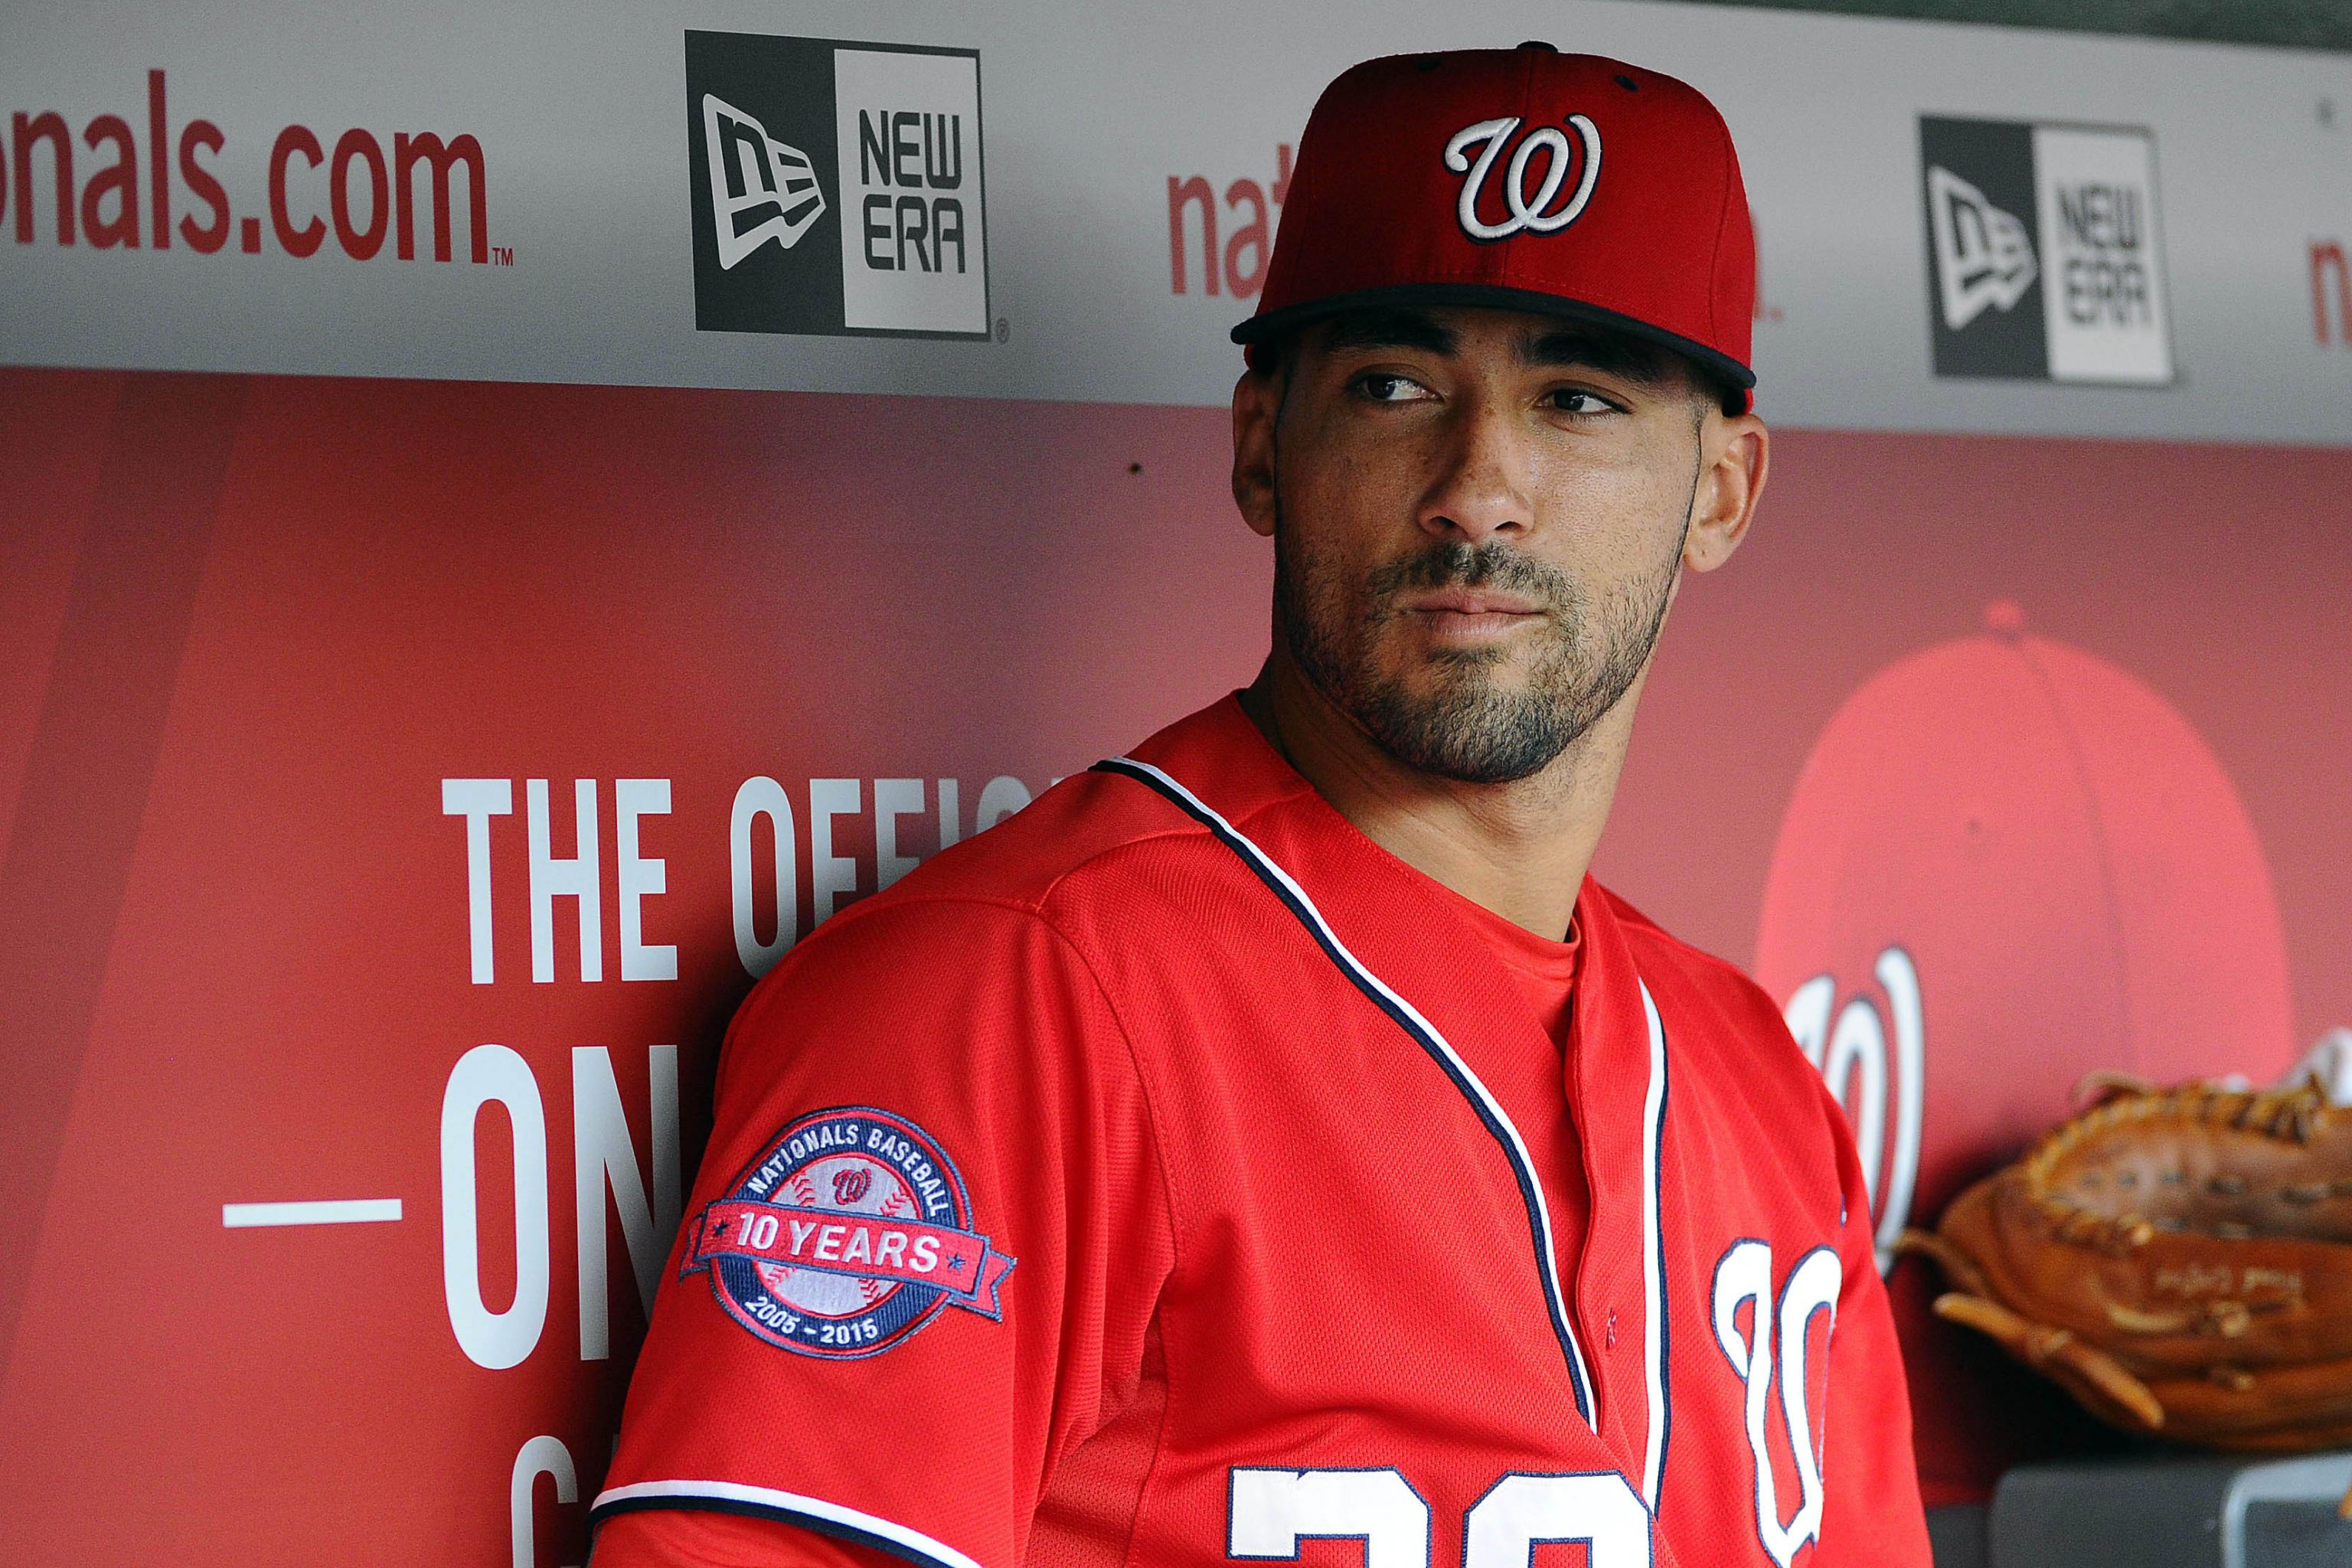 Ian Desmond takes his brother-in-law deep - NBC Sports